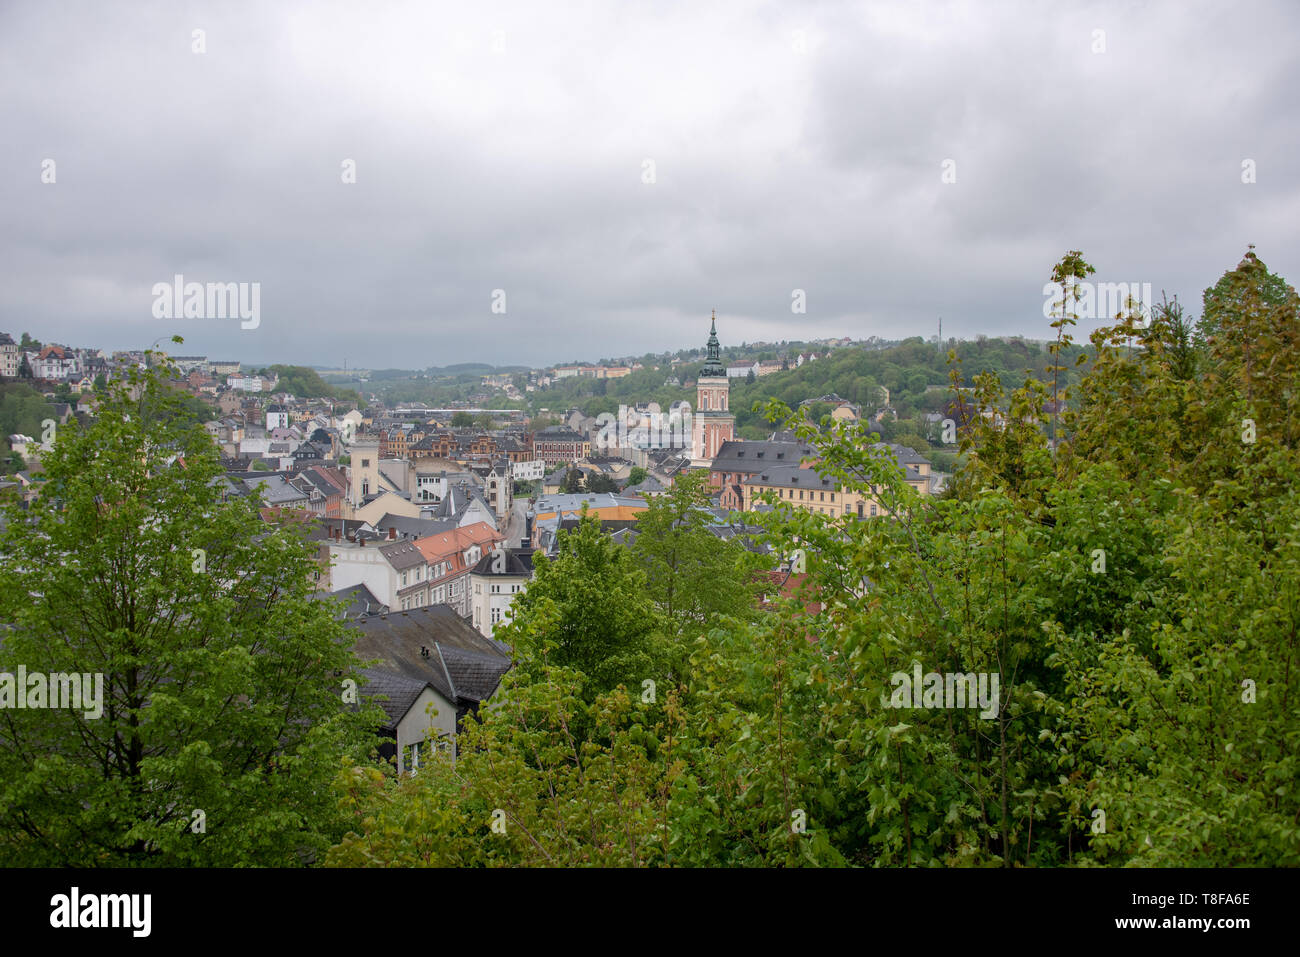 Greiz, Germany - May 12, 2019: View of the city of Greiz with the Stadtkirche St. Marien, Germany. Stock Photo